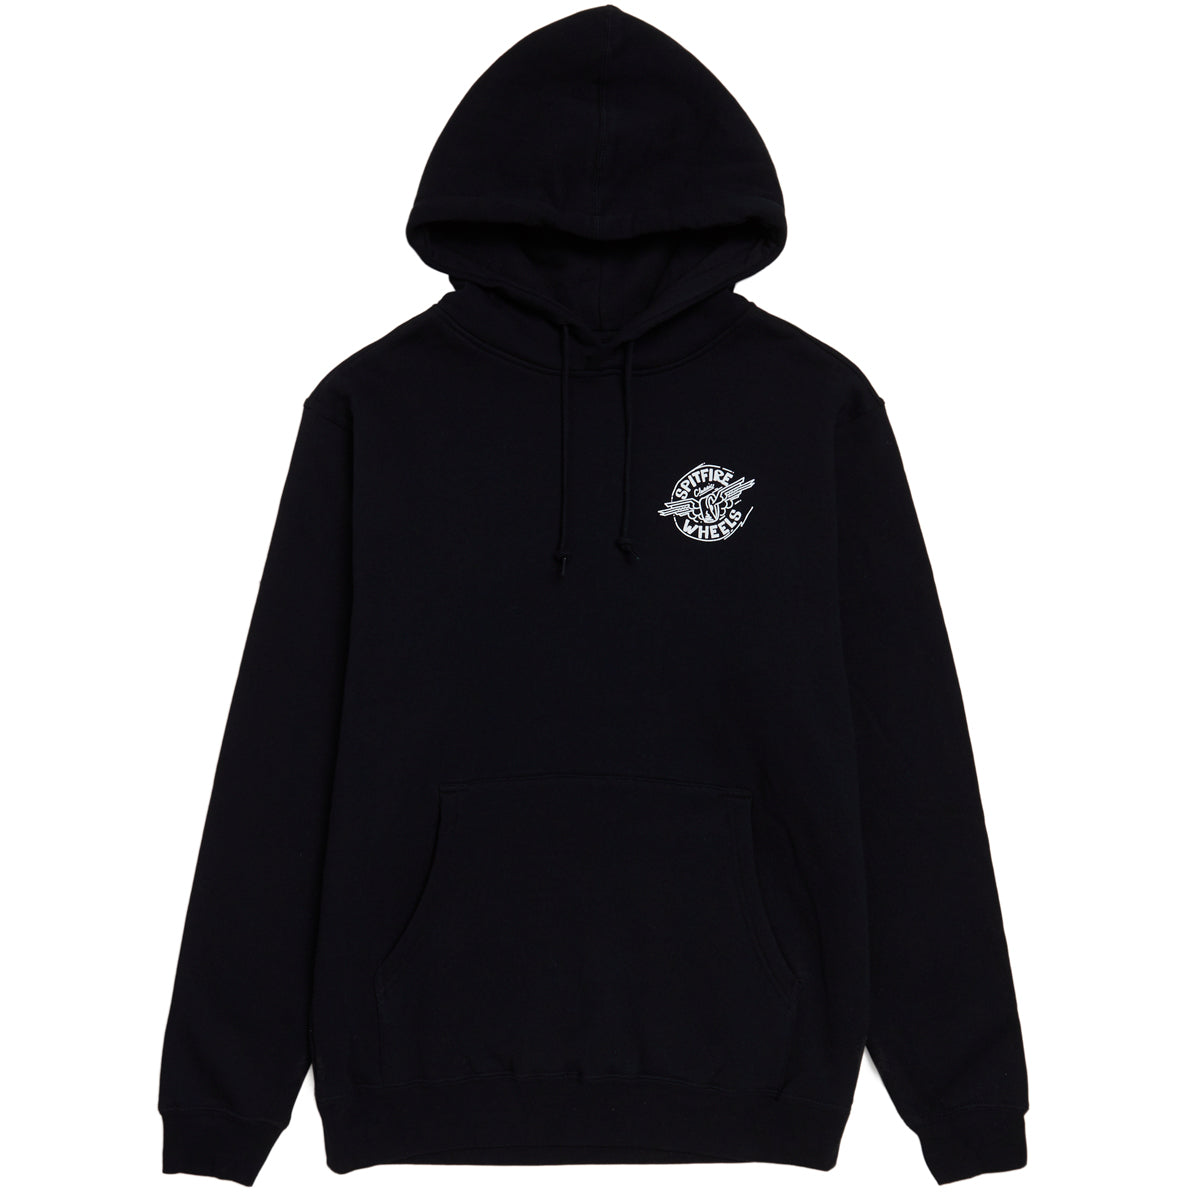 Spitfire Gonz Flying Classic Hoodie - Black image 2